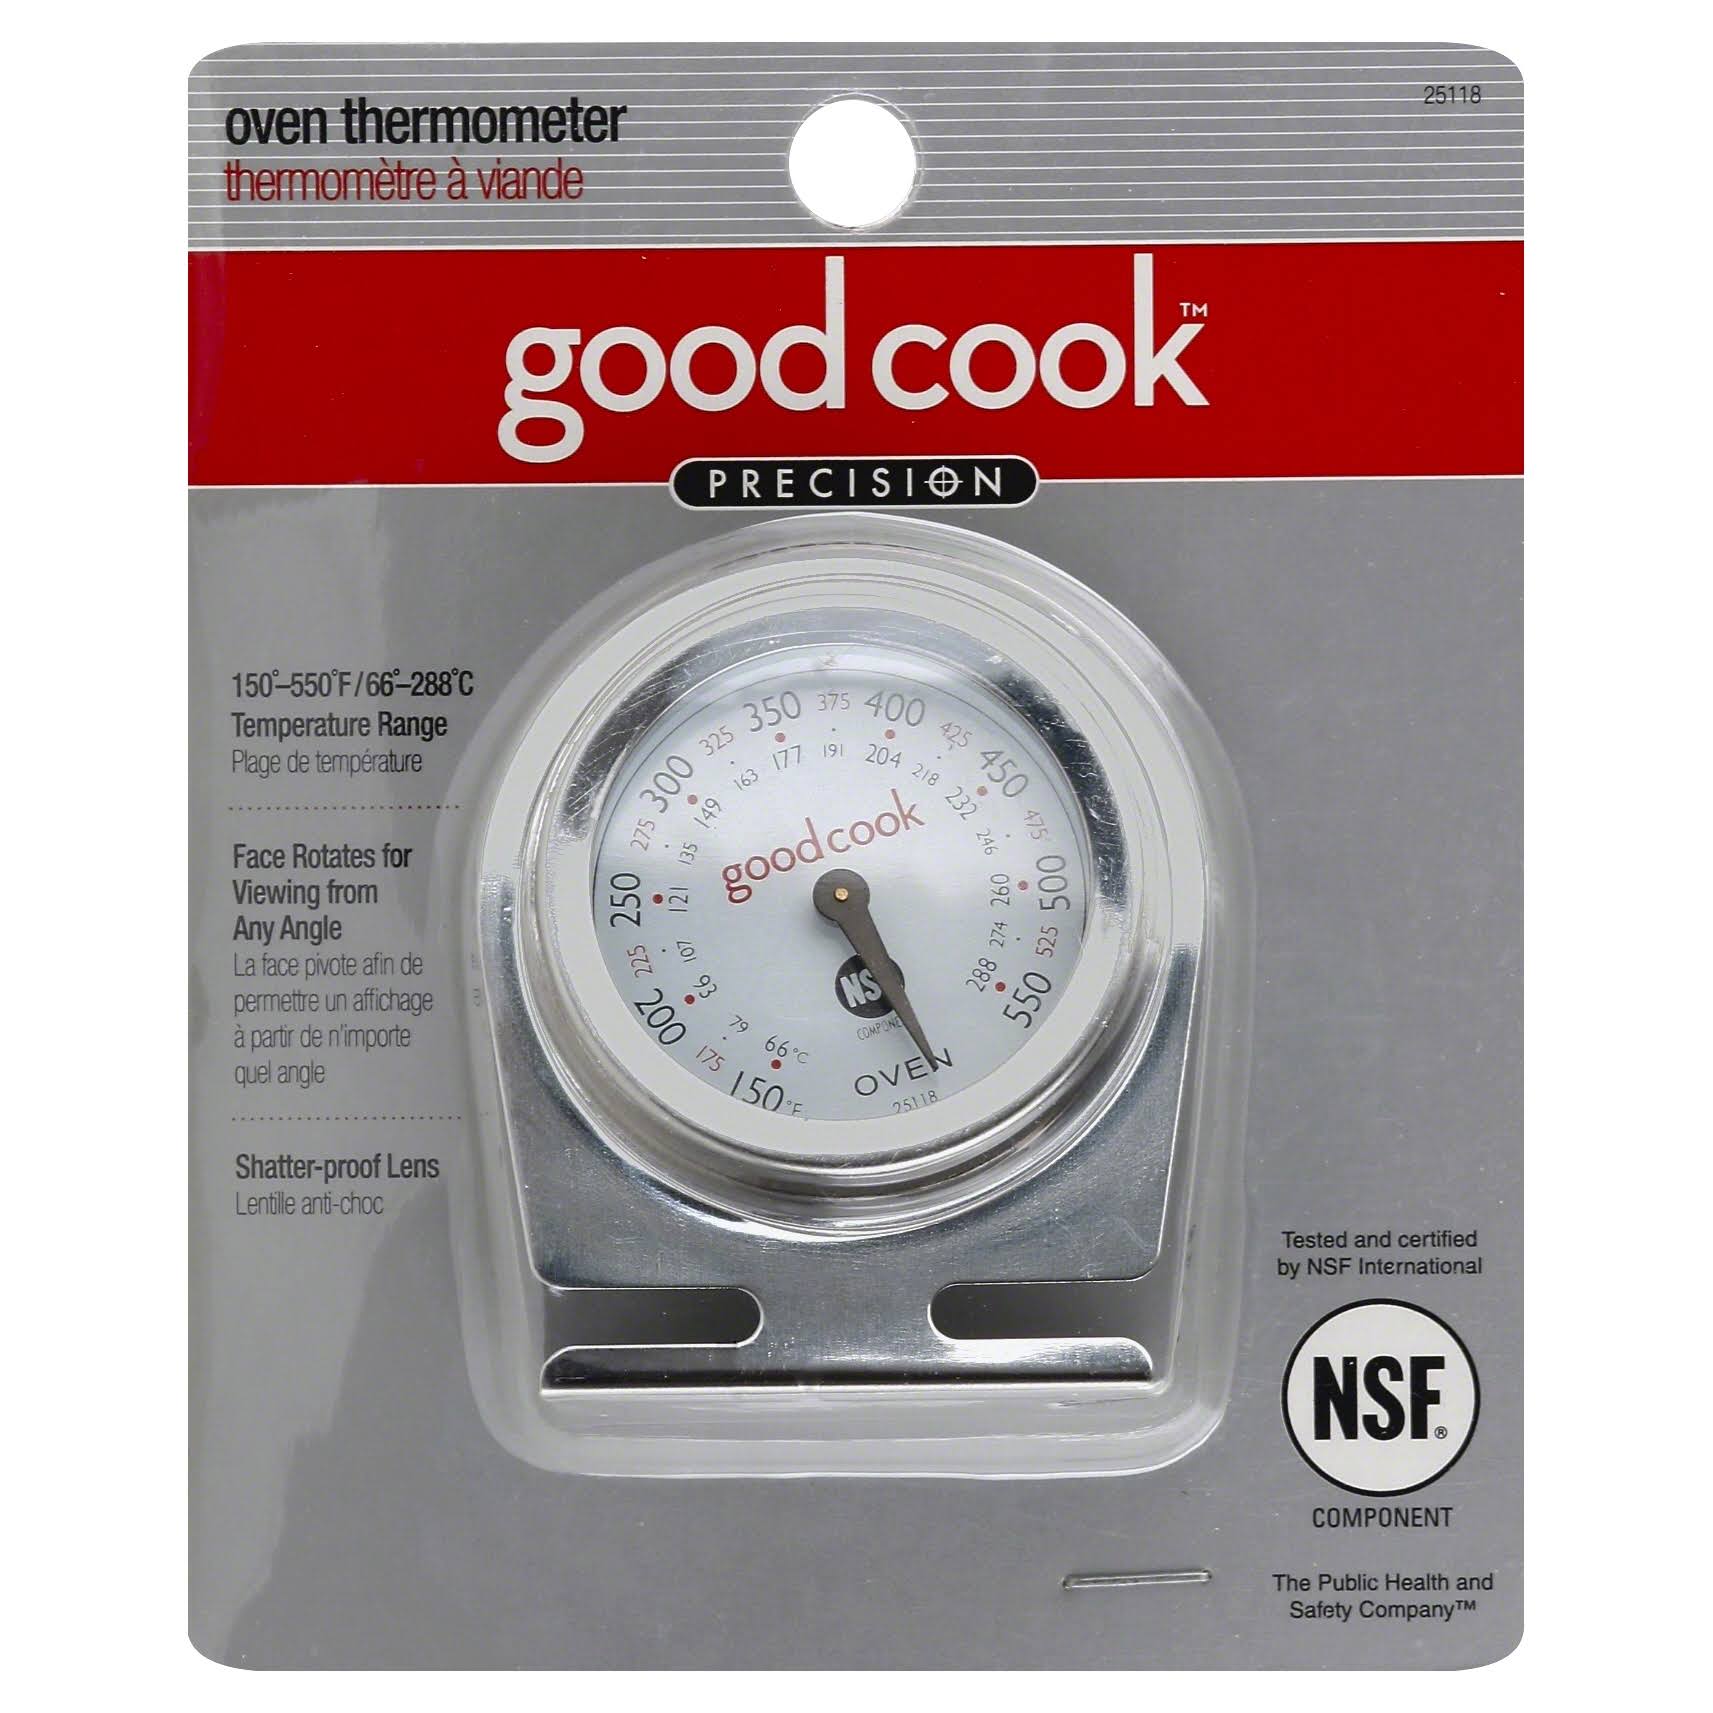 Good Cook Classic Oven Thermometer